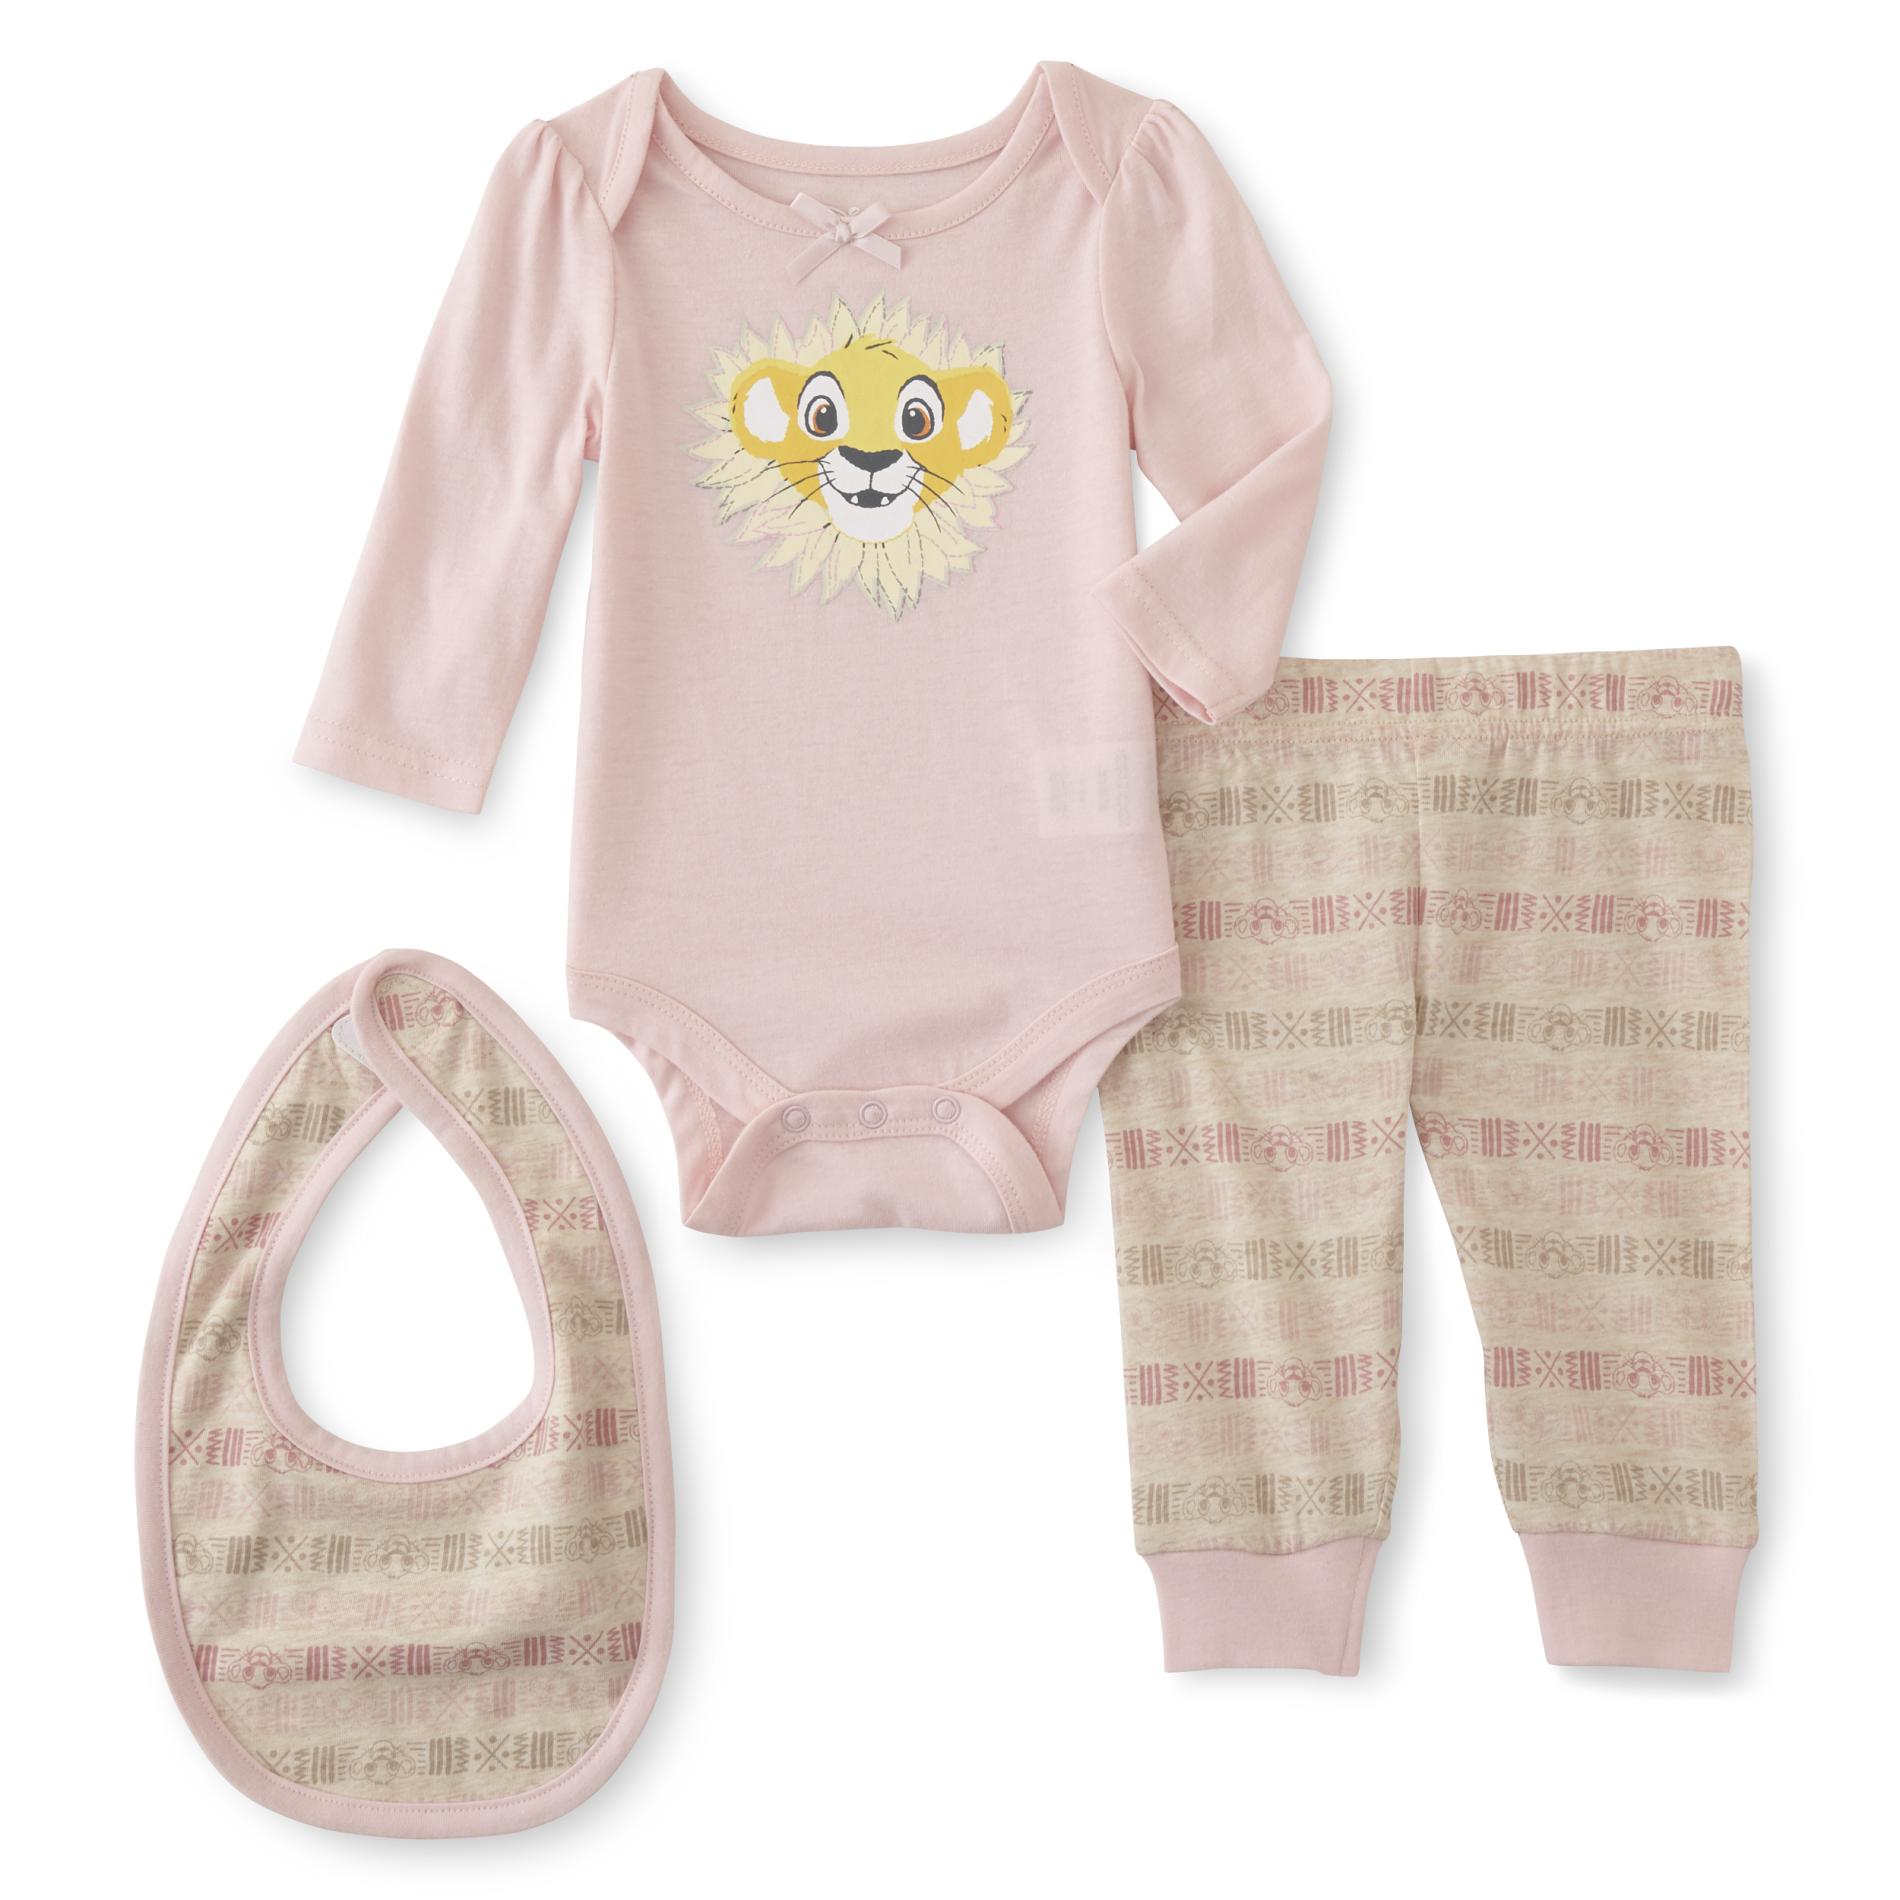 lion king baby girl clothes